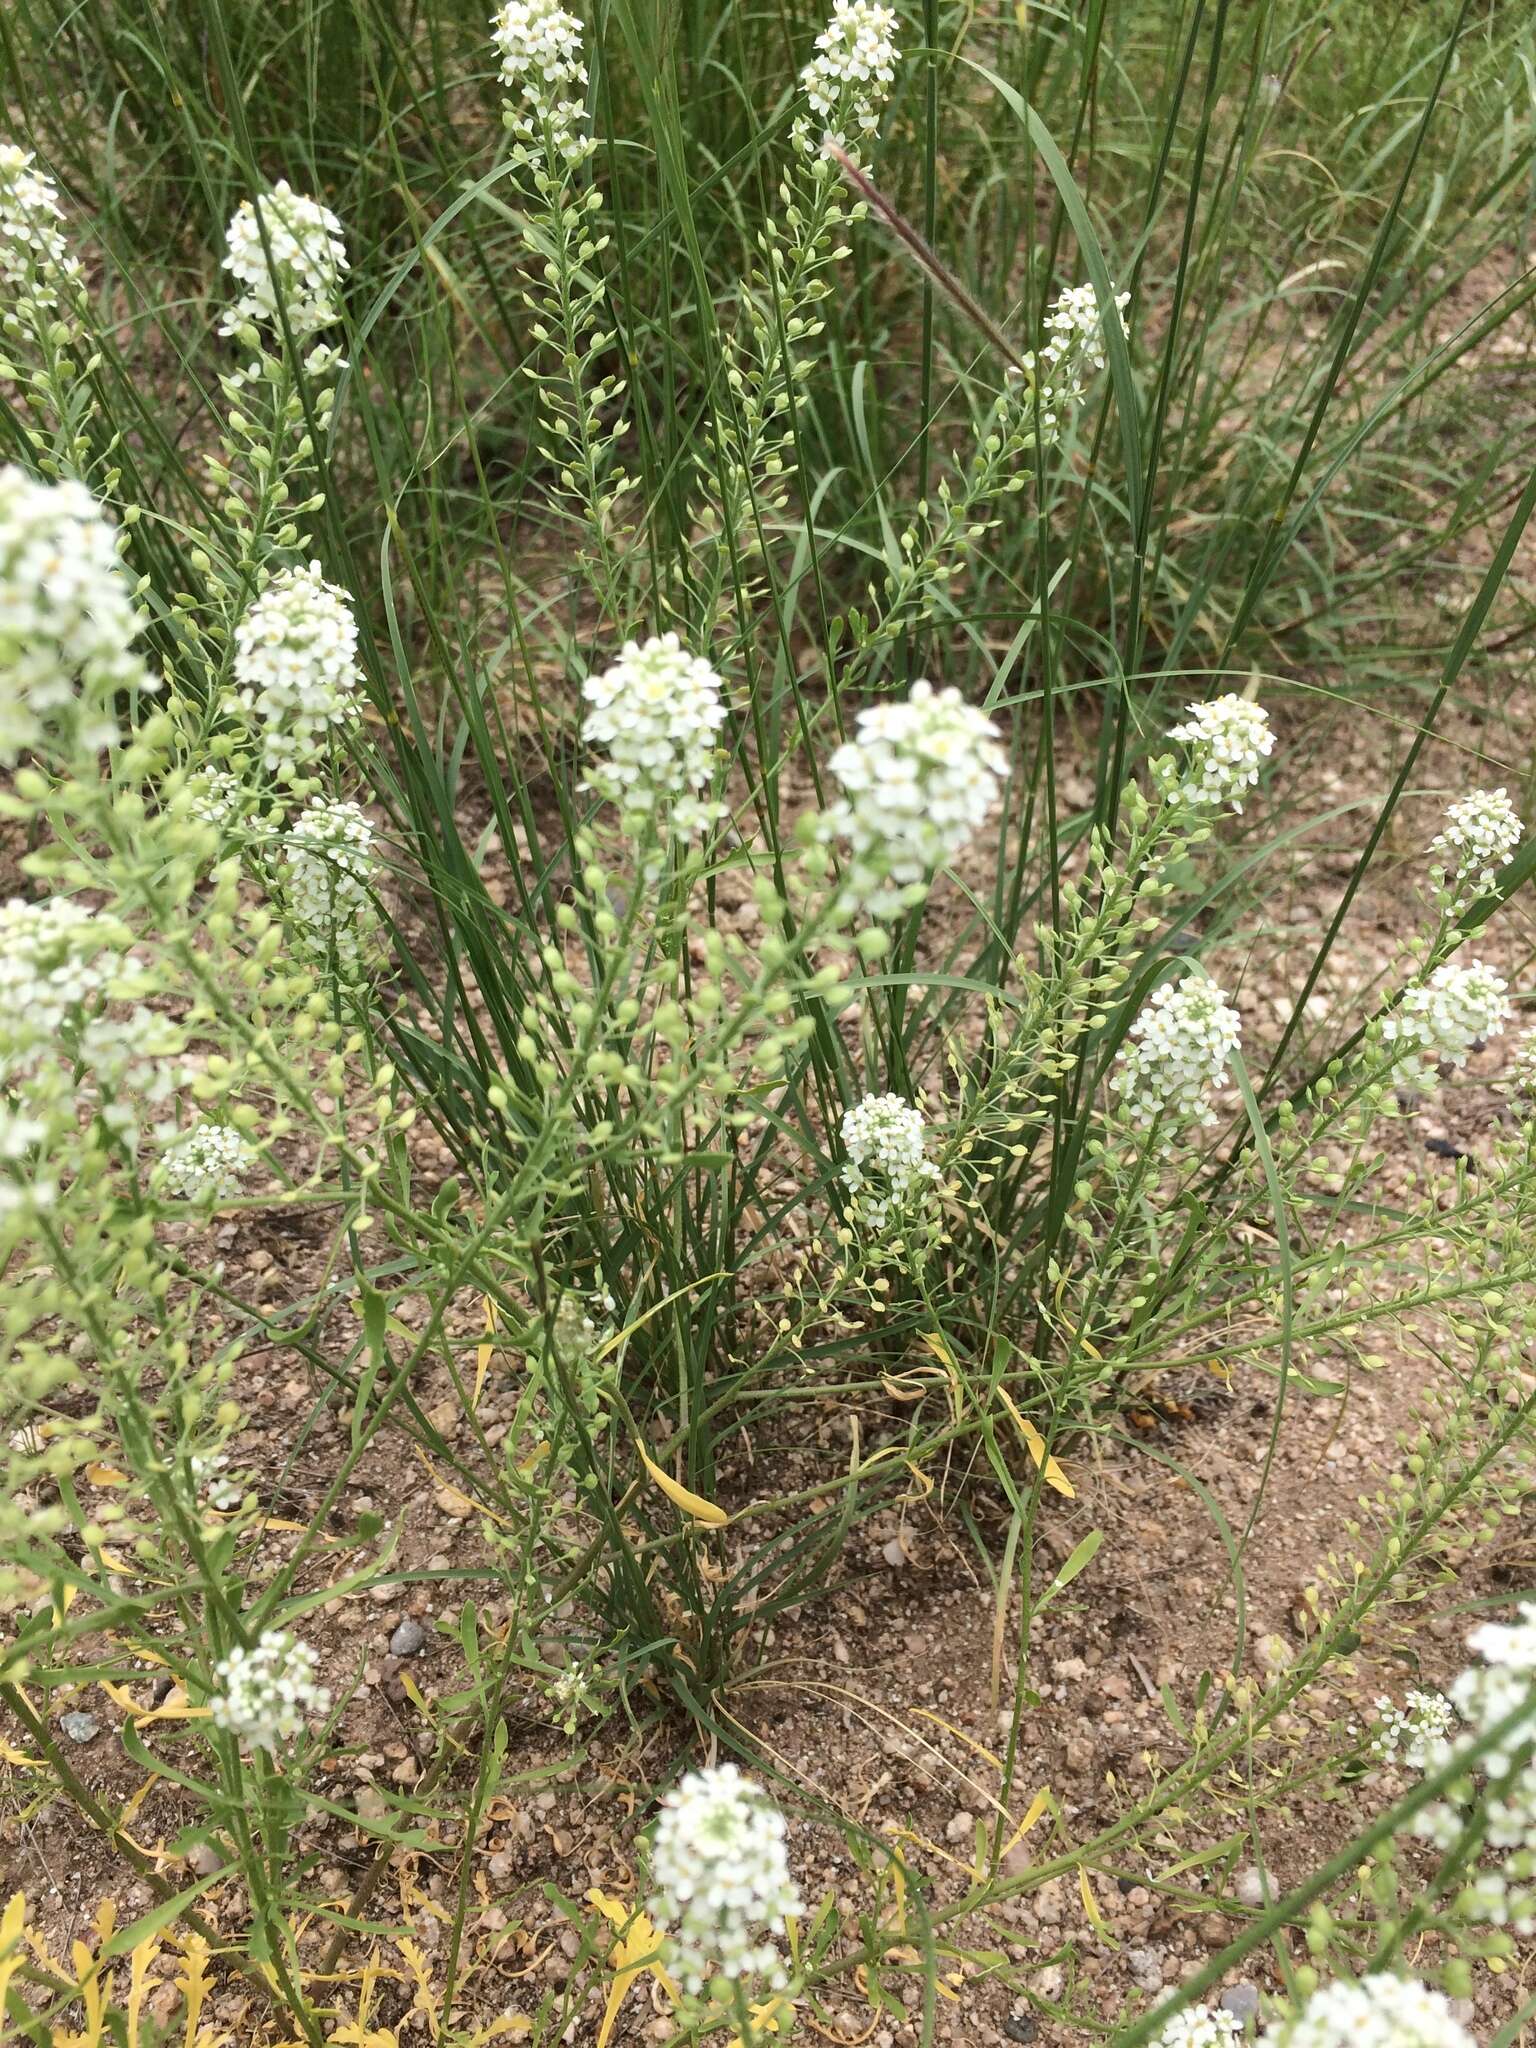 Image of peppergrass